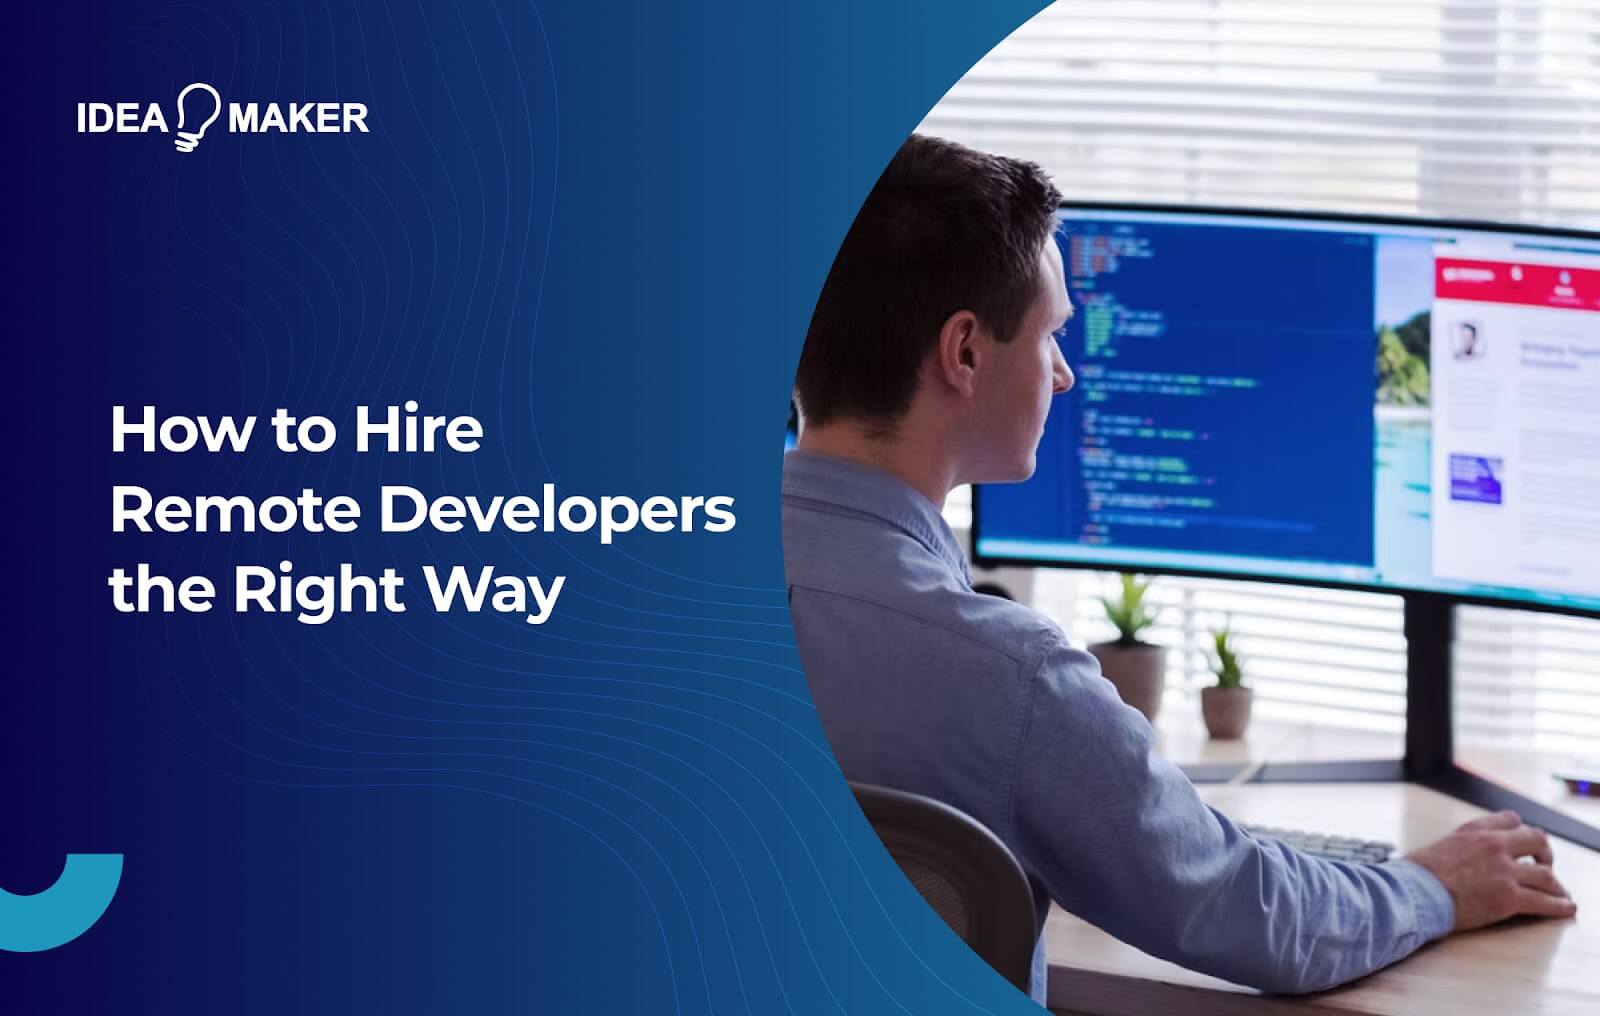 Ideamaker - How To Hire Remote Developers